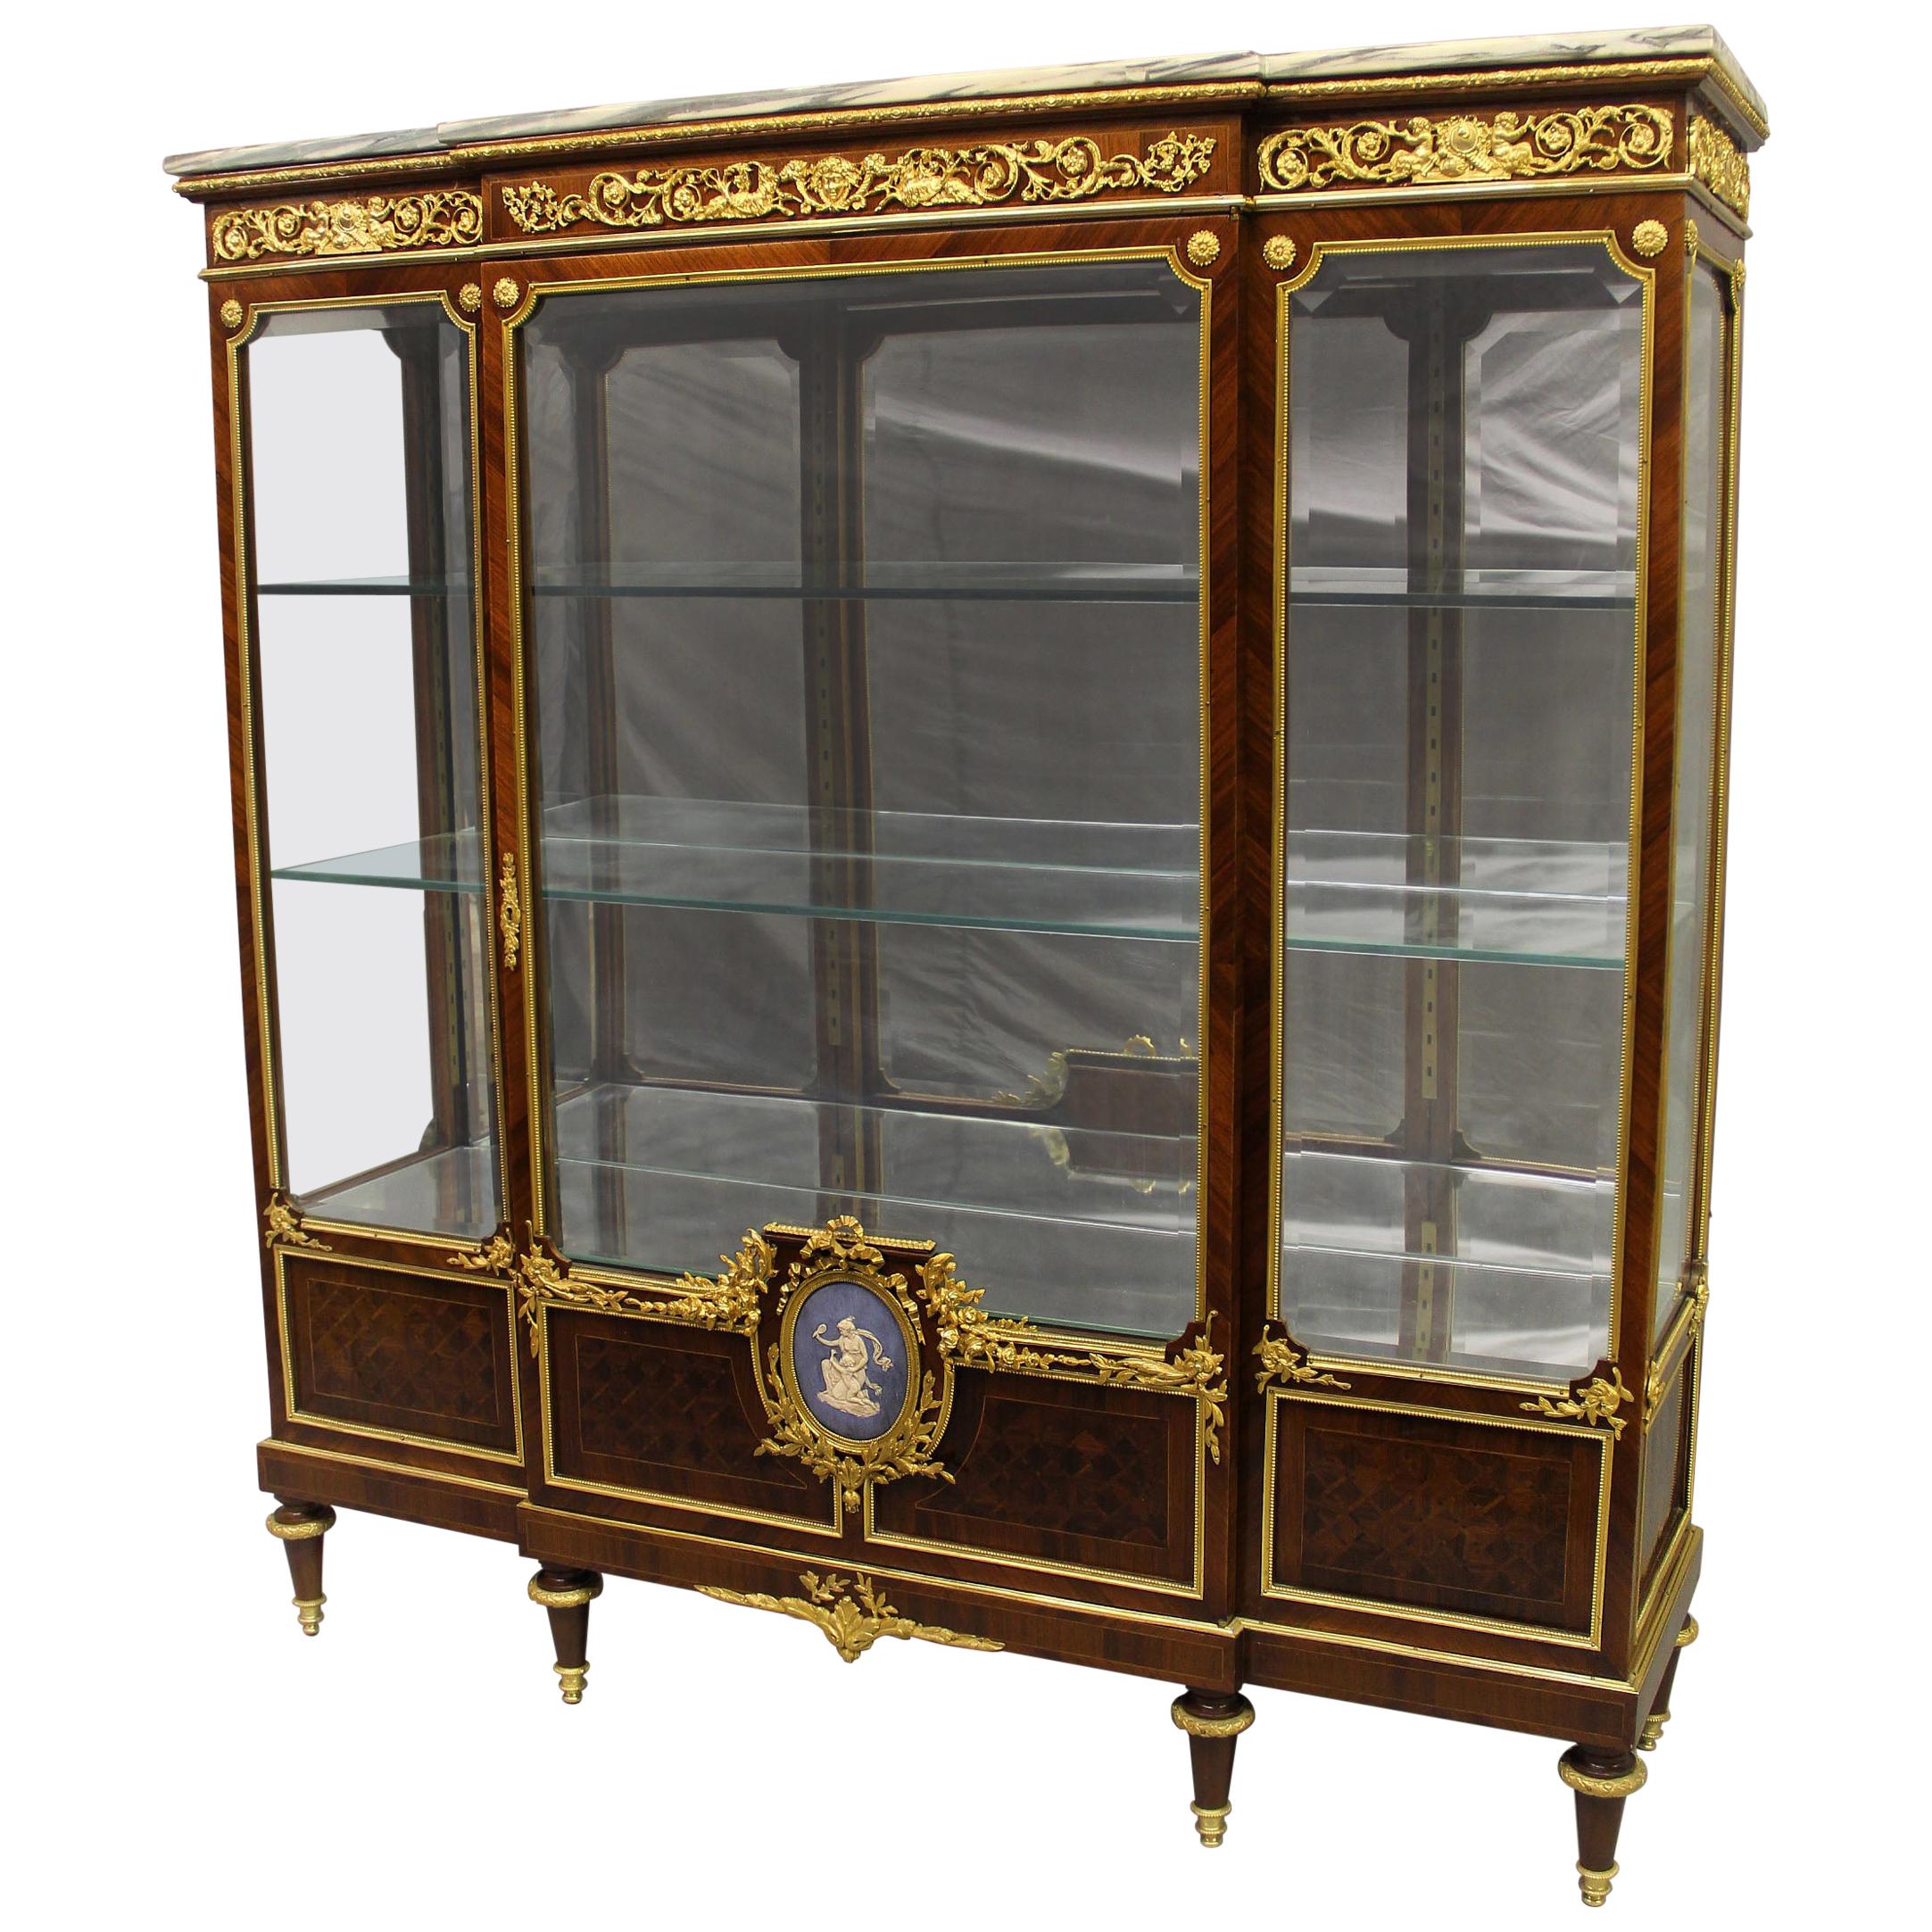 Interesting 19th Century Gilt Bronze and Wedgwood Mounted Parquetry Vitrine